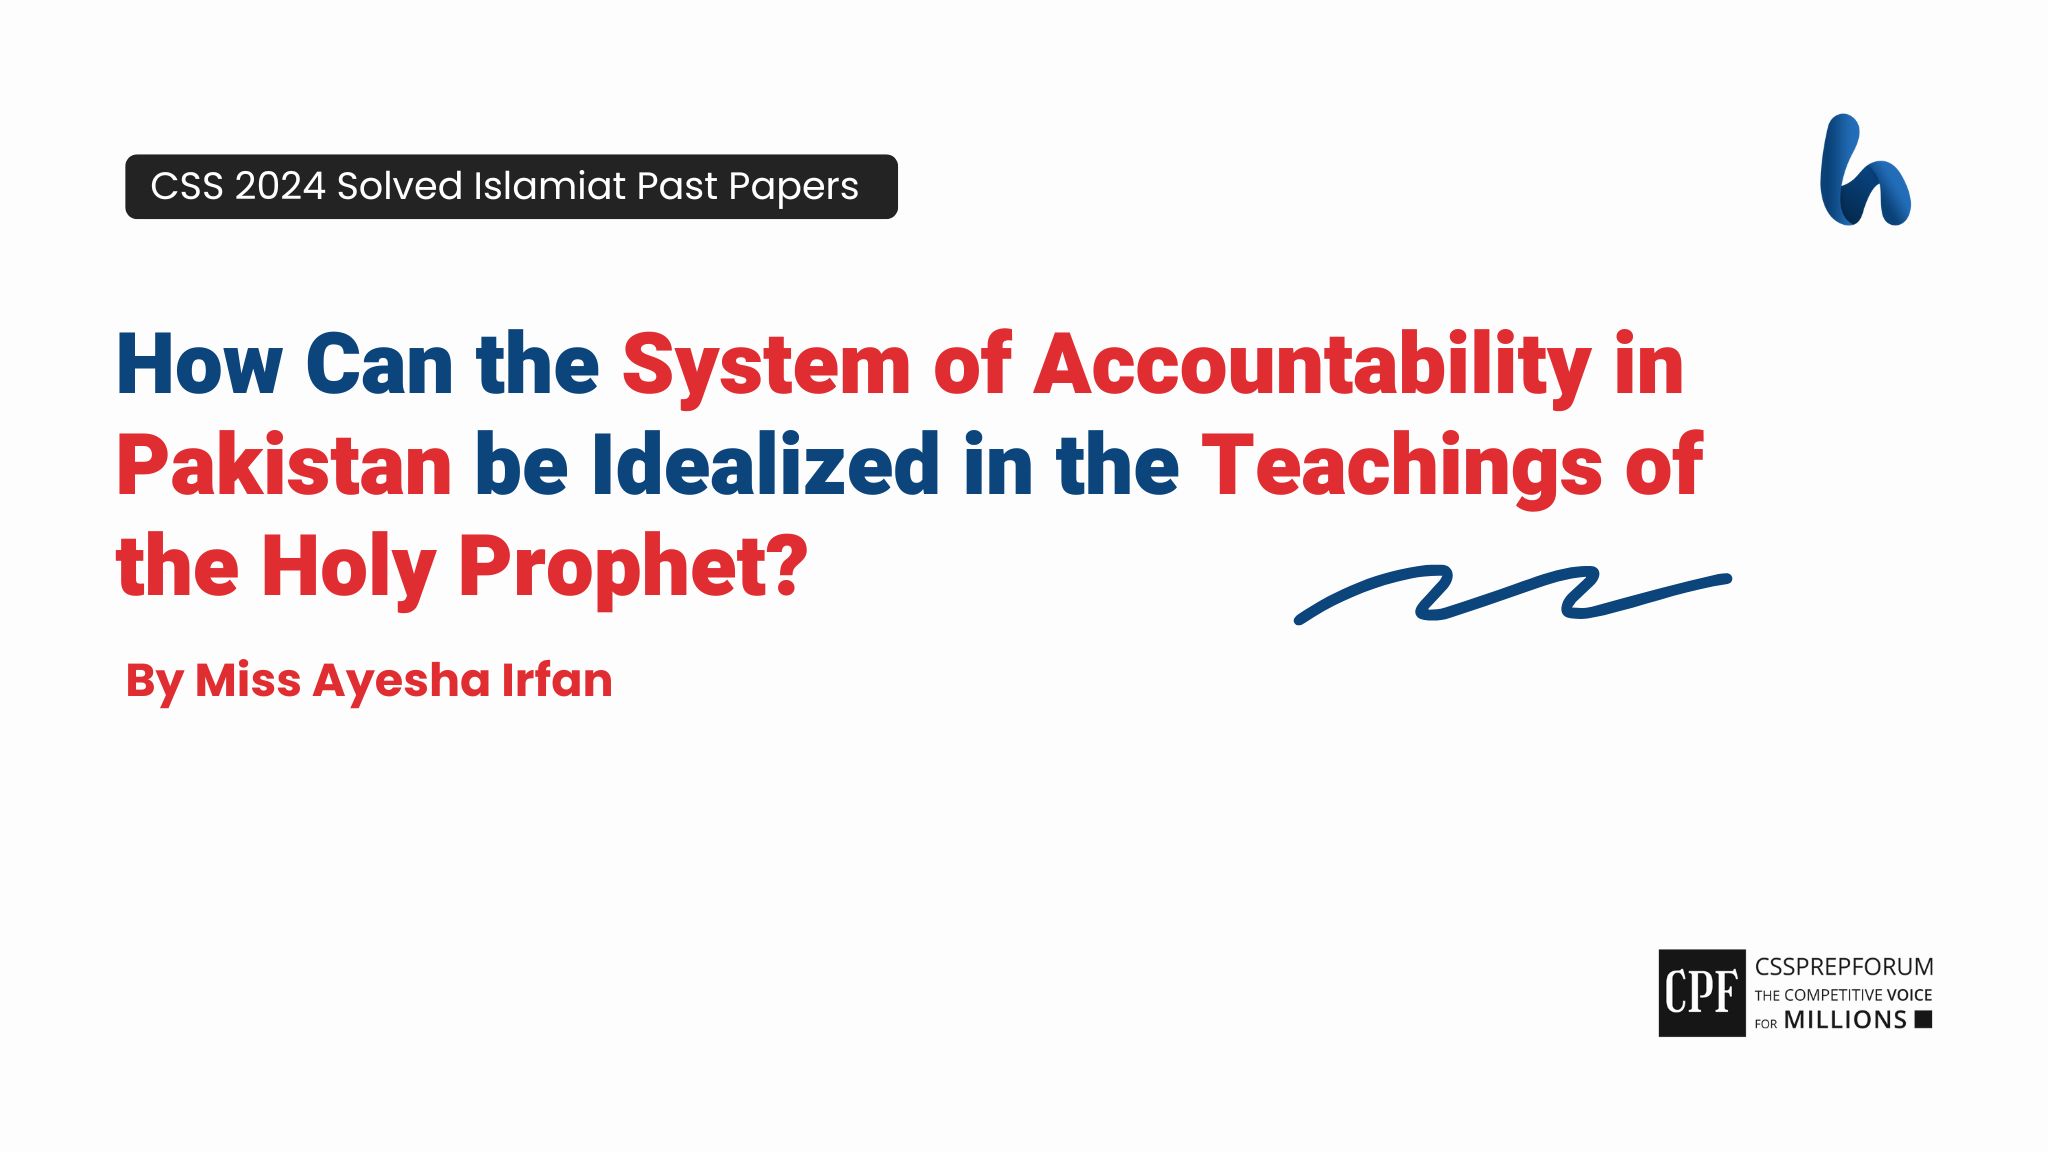 CSS Islamiat 2024 question, "How Can the System of Accountability in Pakistan be Idealized in the Teachings of the Holy Prophet?" is Solved by Miss Ayesha Irfan...